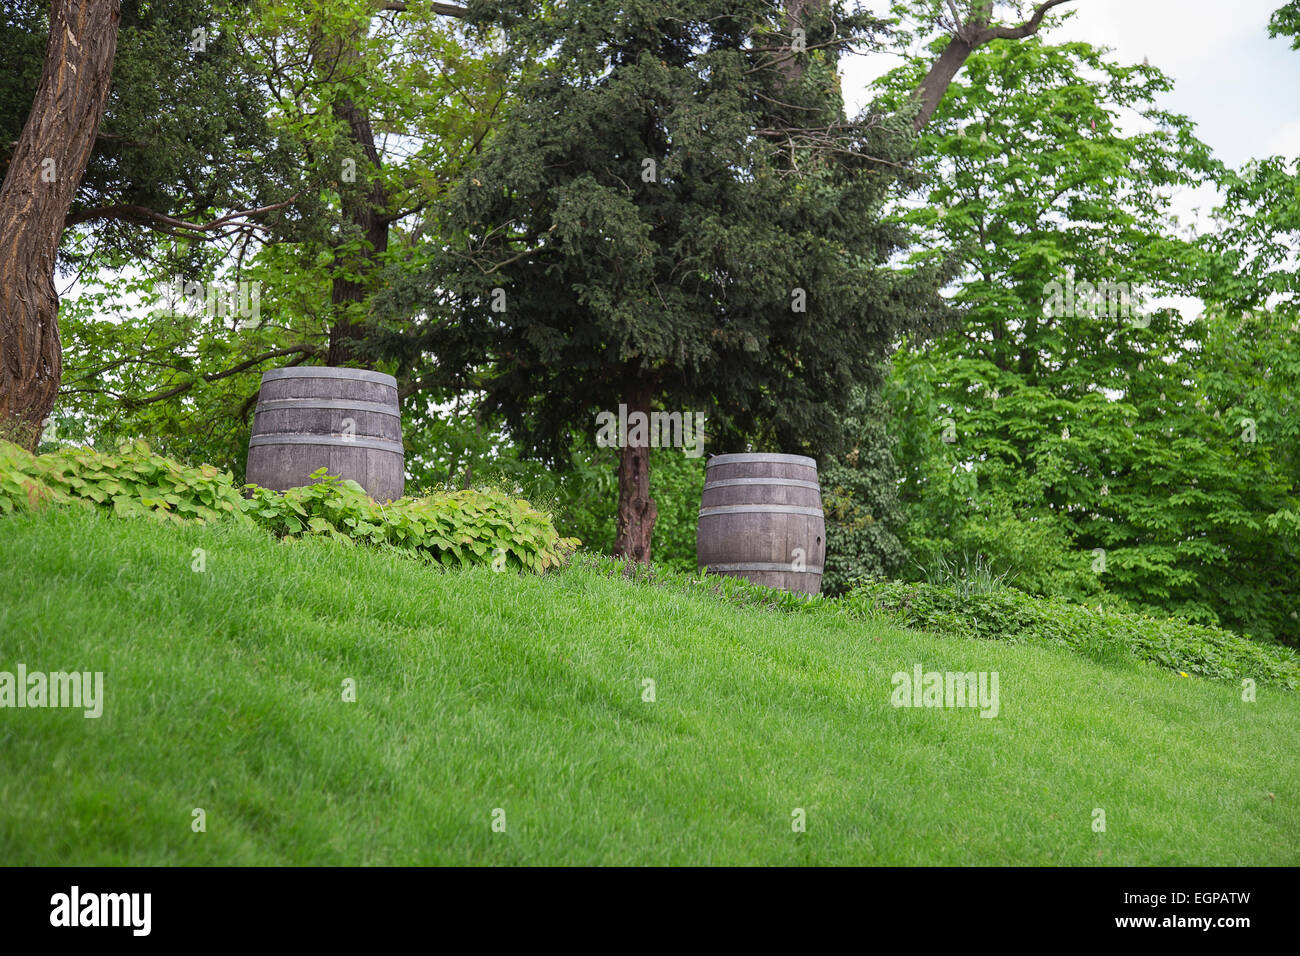 old oak barrel outdoors in the grass and trees Stock Photo